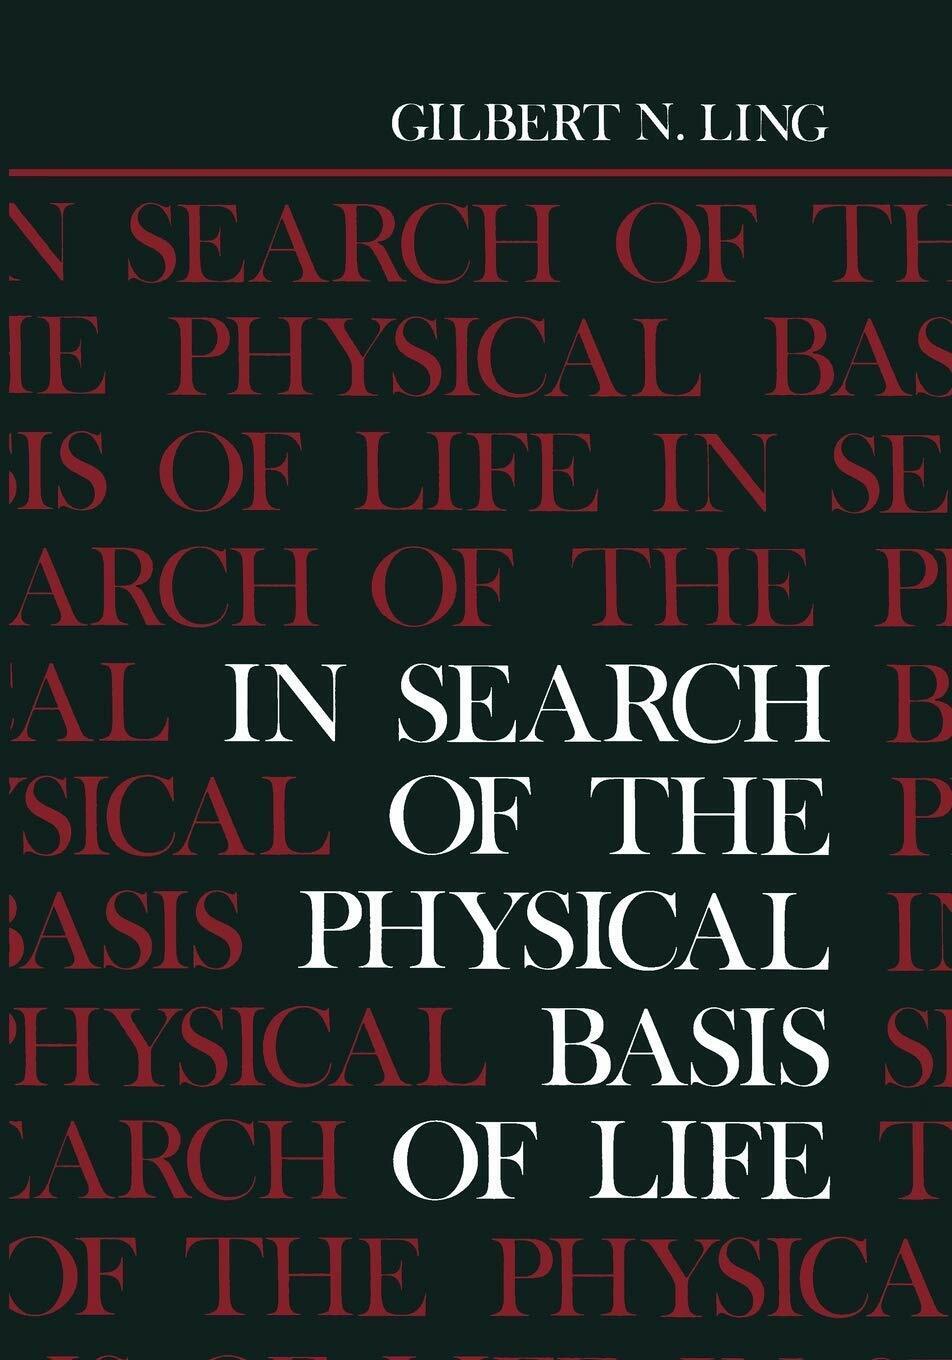 In Search of the Physical Basis of Life - Gilbert Ling - Springer, 2013